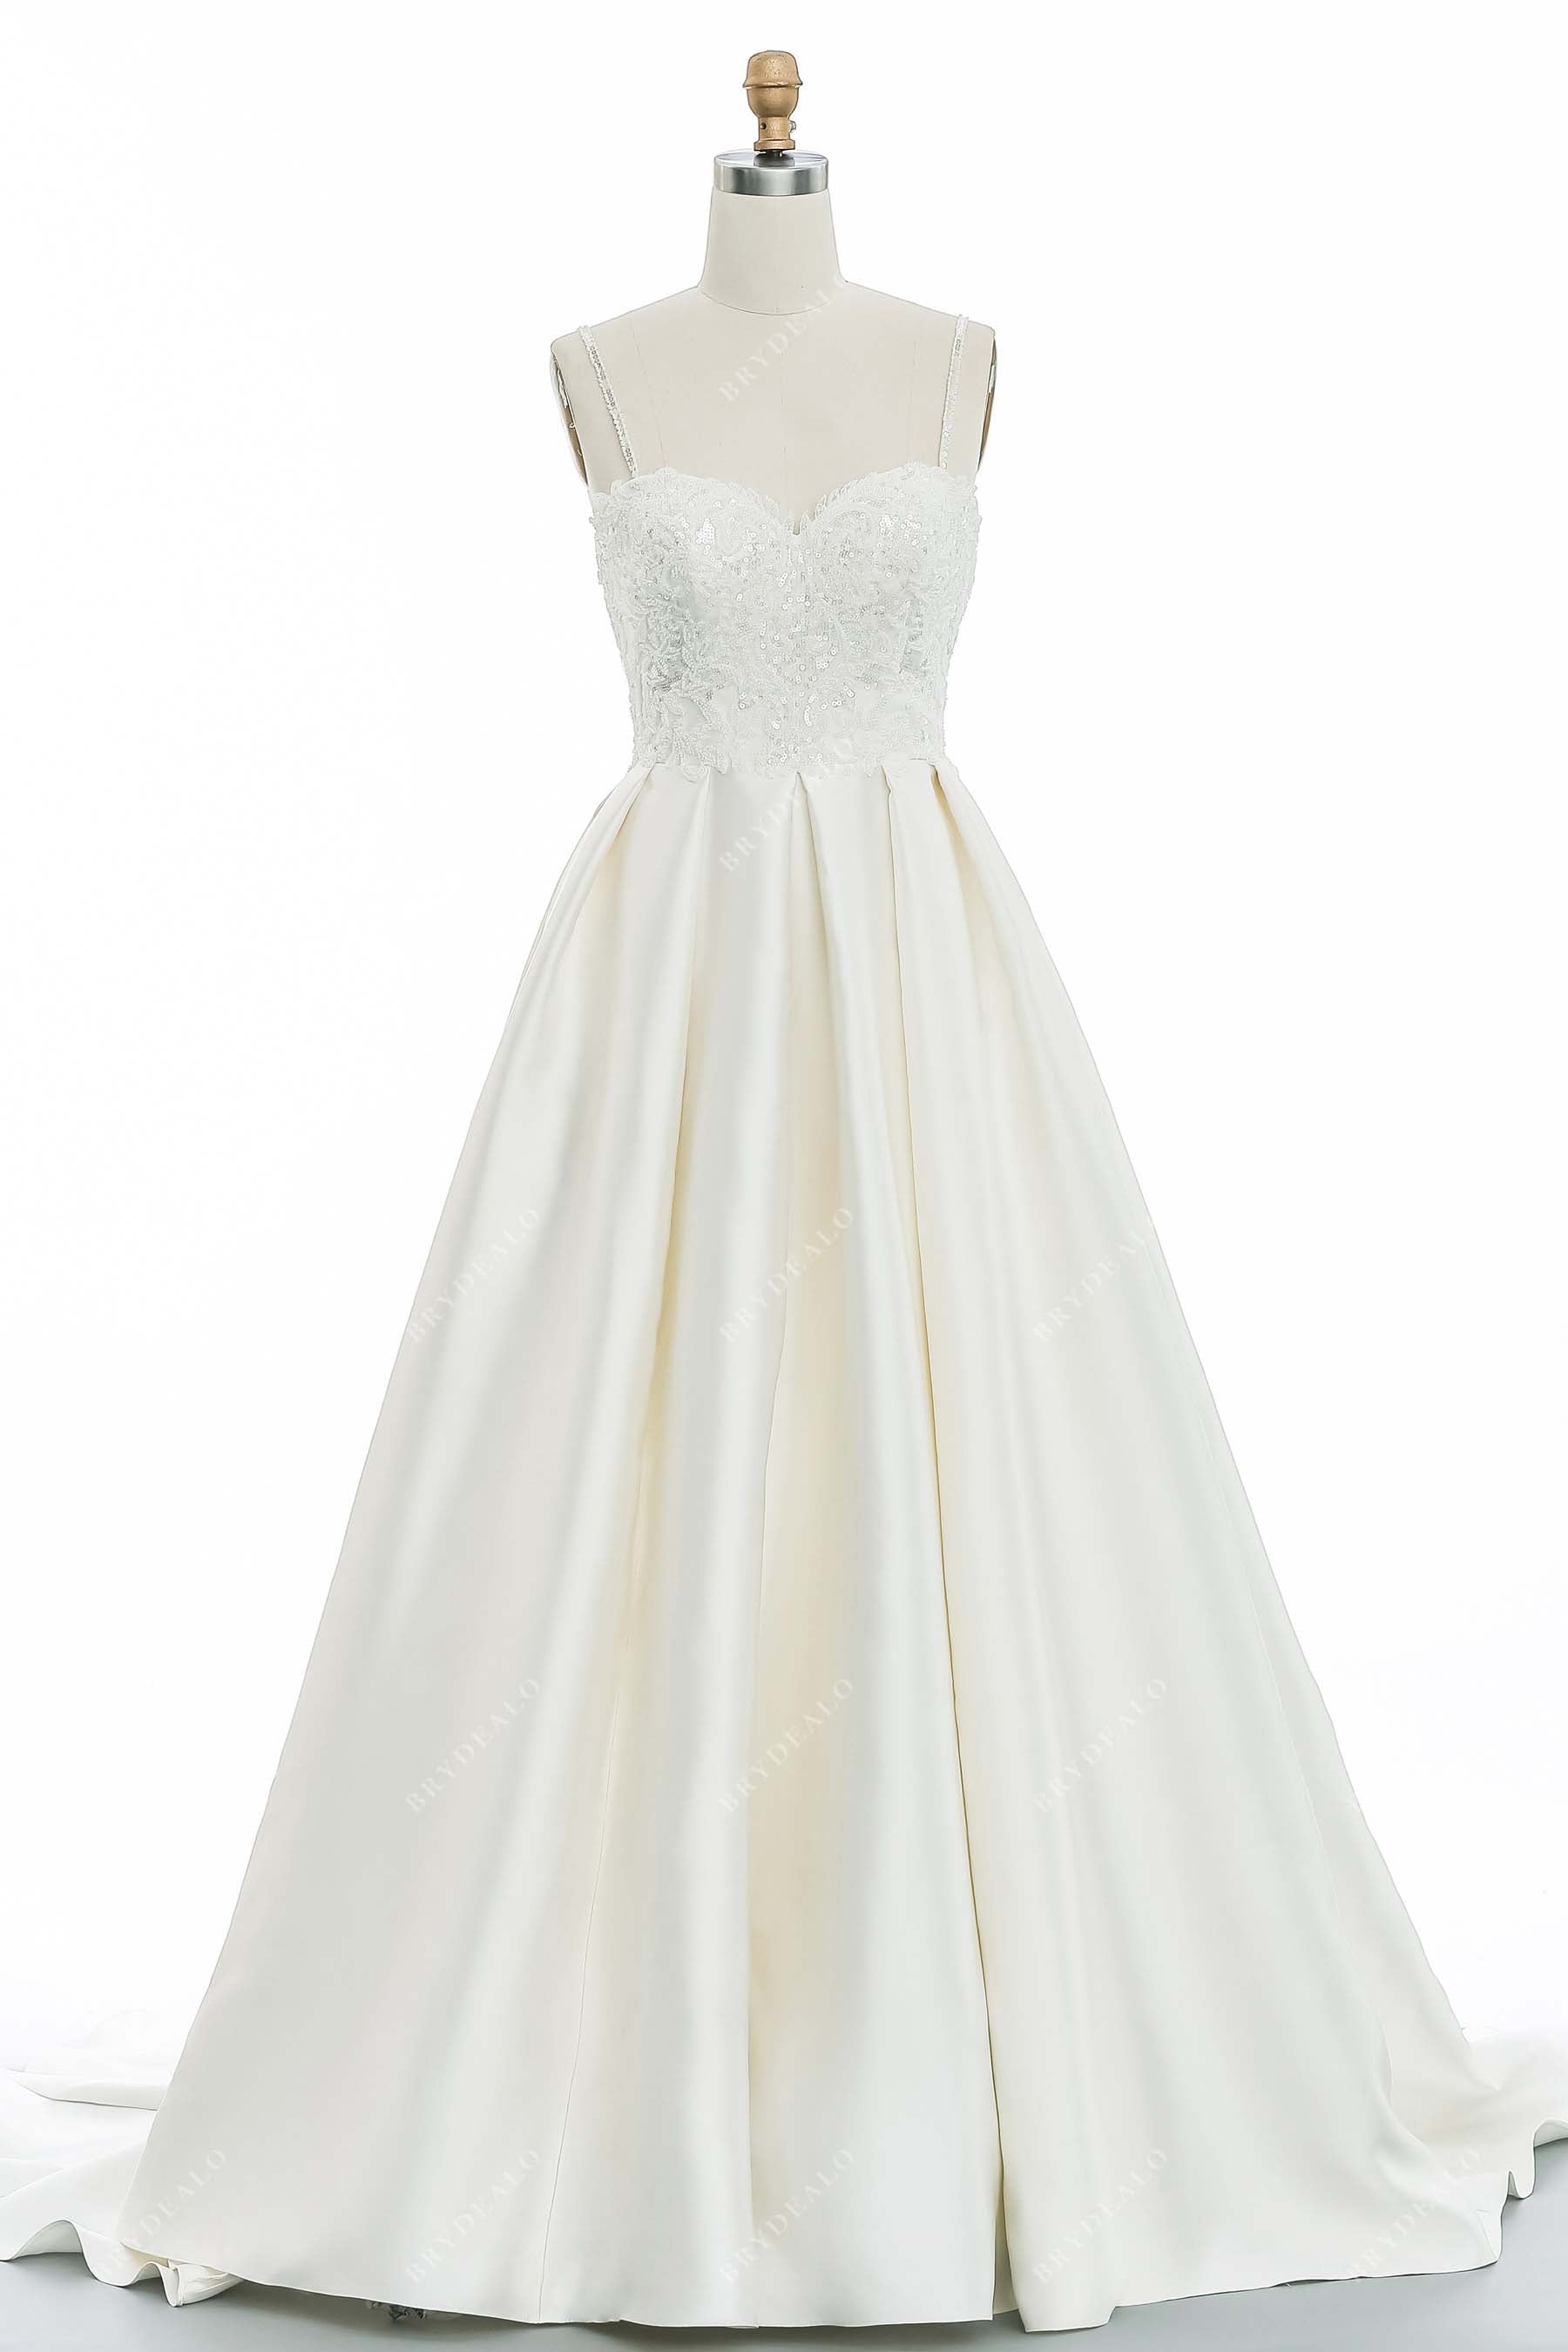 Simple Sequined Lace Satin Puffy A-line Wedding Dress